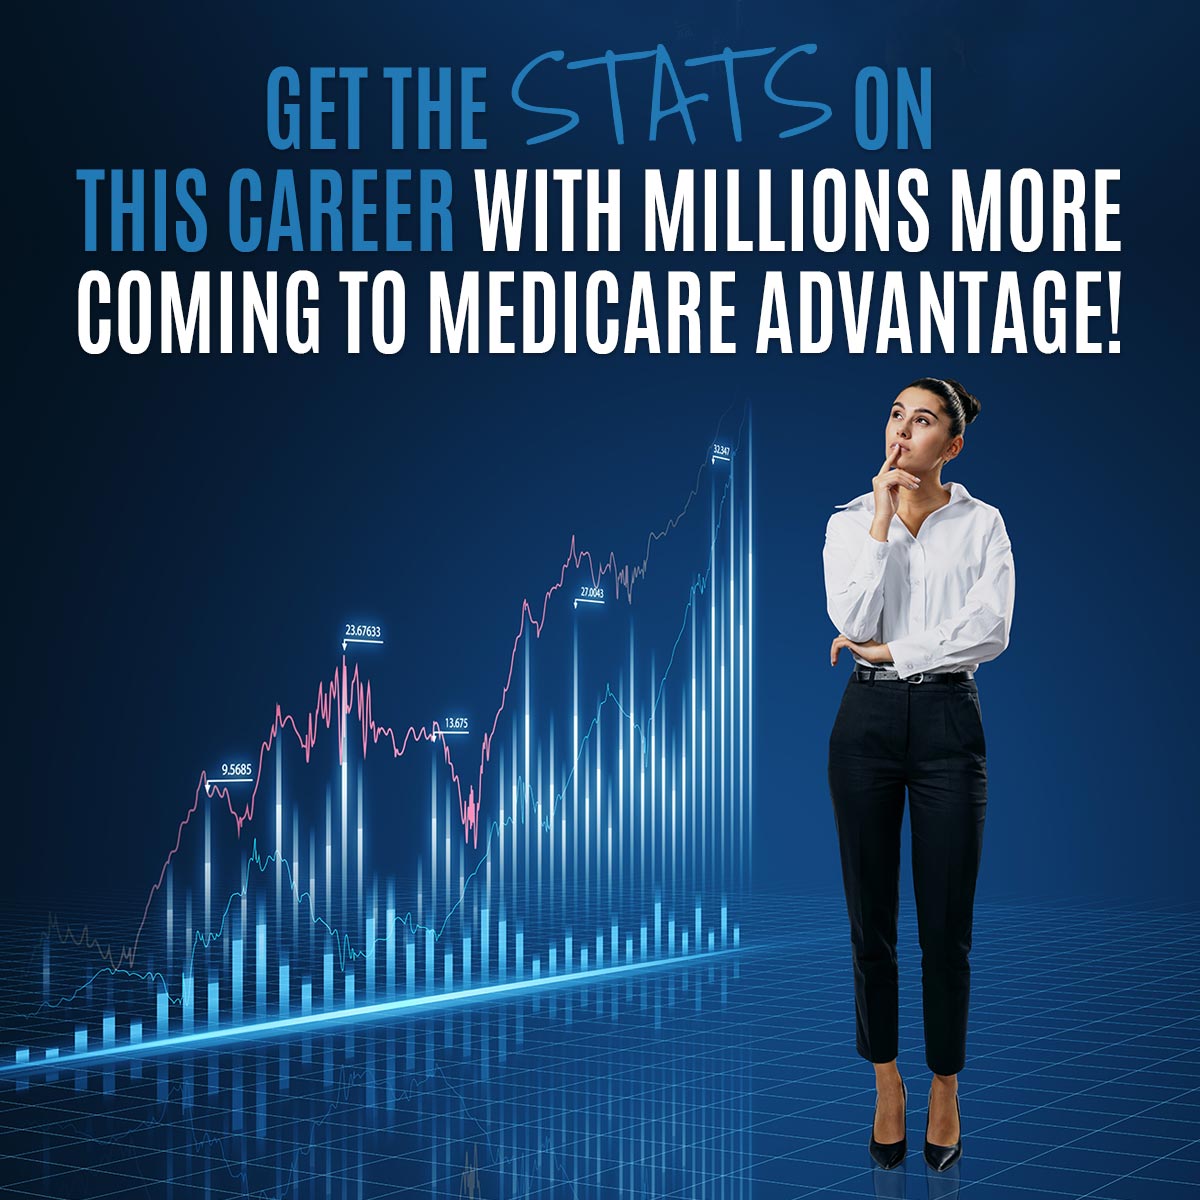 Get the stats on this career with millions more coming to Medicare! Click here to learn more.